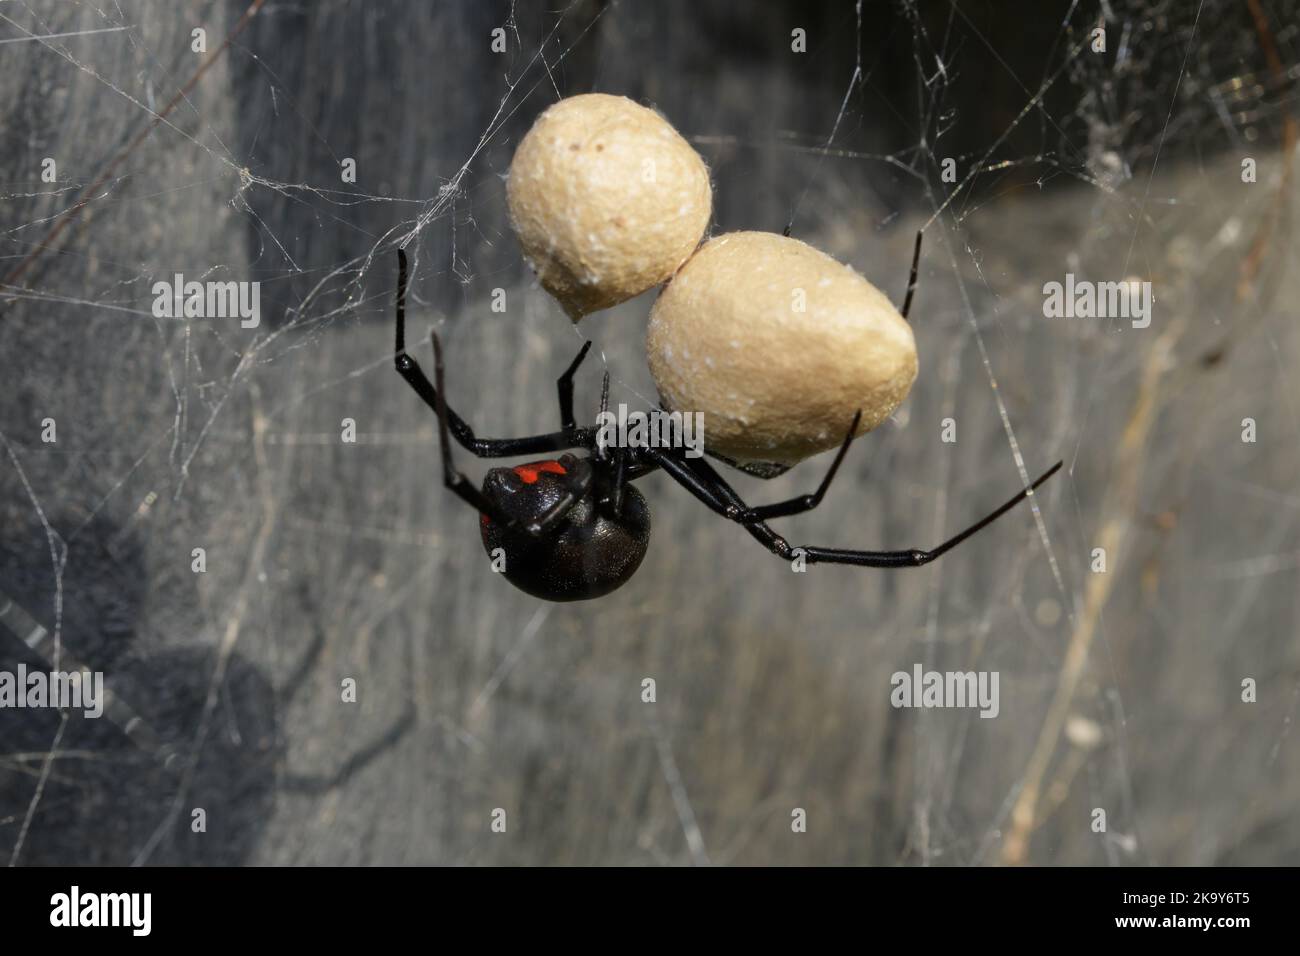 Female Southern Black Widow spider guarding her two egg sacs, hanging on her web Stock Photo